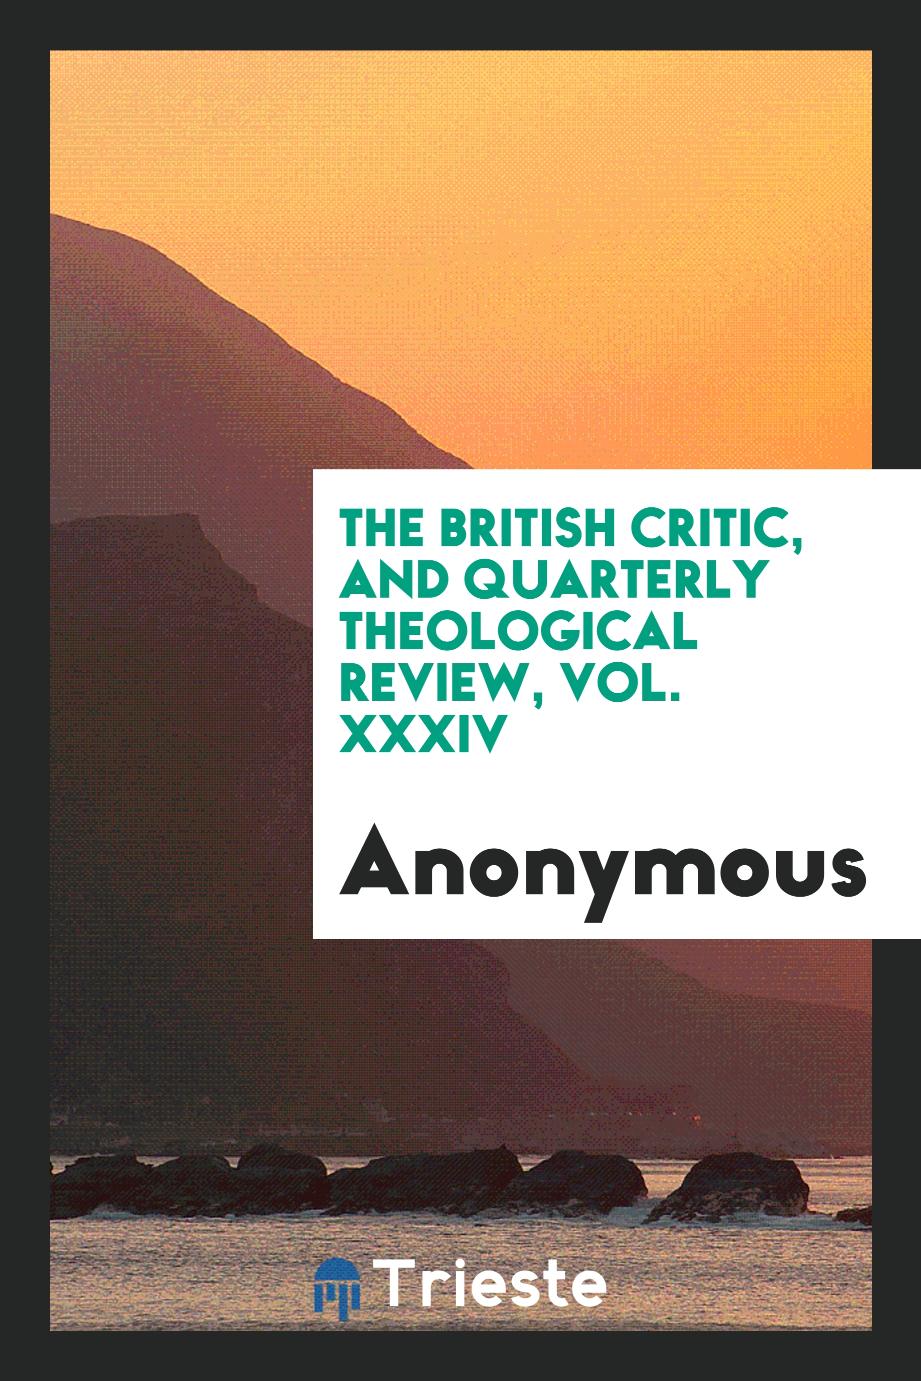 The British critic, and quarterly theological review, Vol. XXXIV